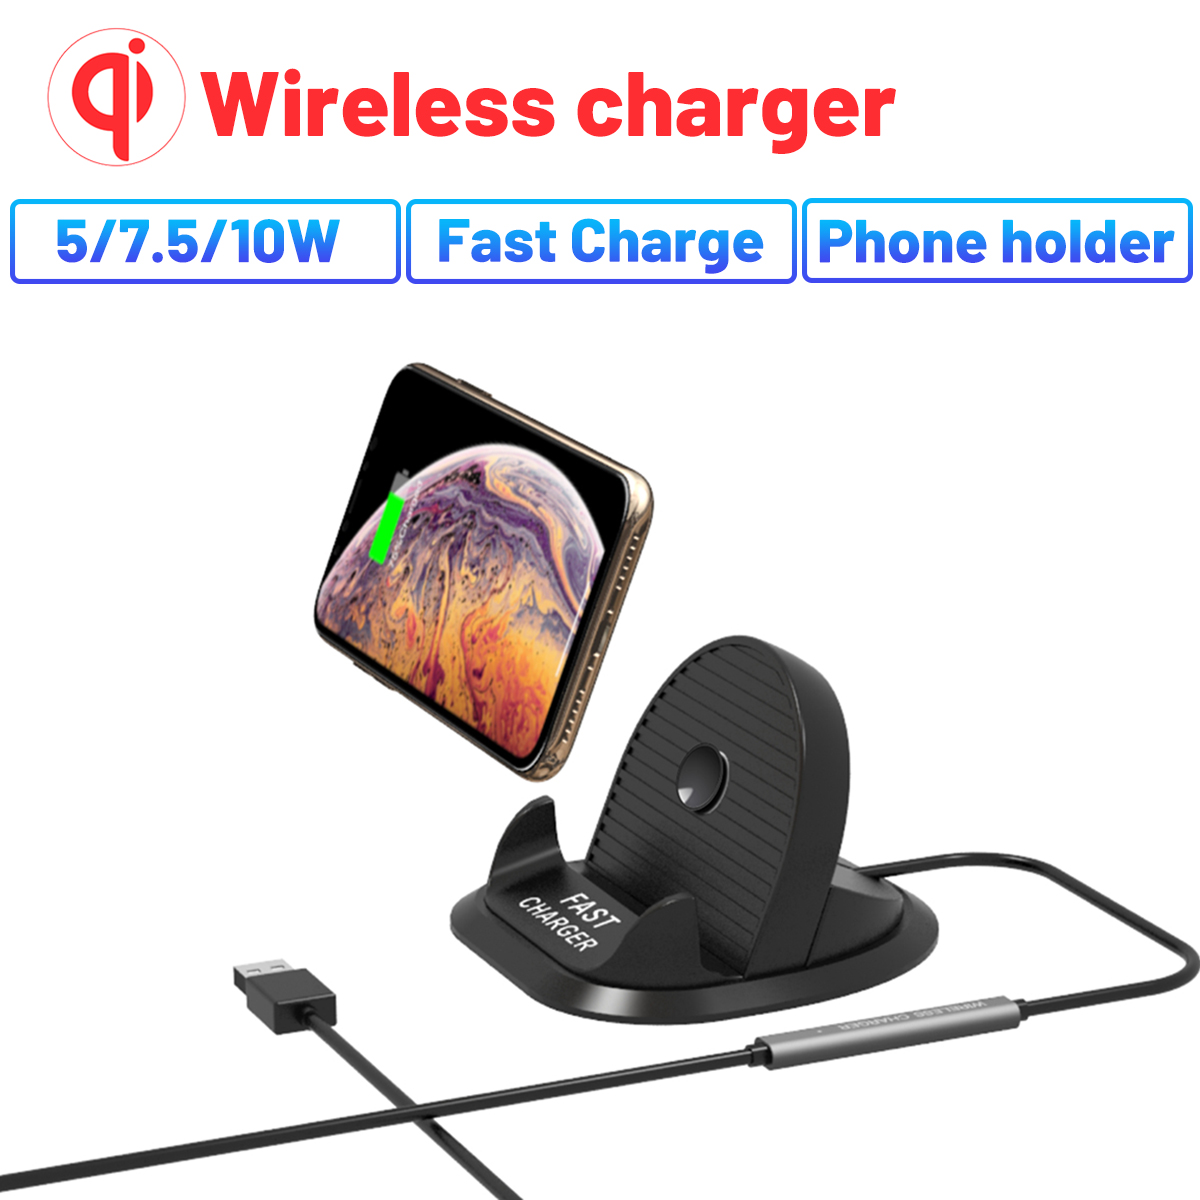 Bakeey-Wireless-Car-Charger-Base-5W75W10W-Wireless-Car-Holder-Charging-Bracket-For-iPhone-XS-11Pro-A-1707697-2